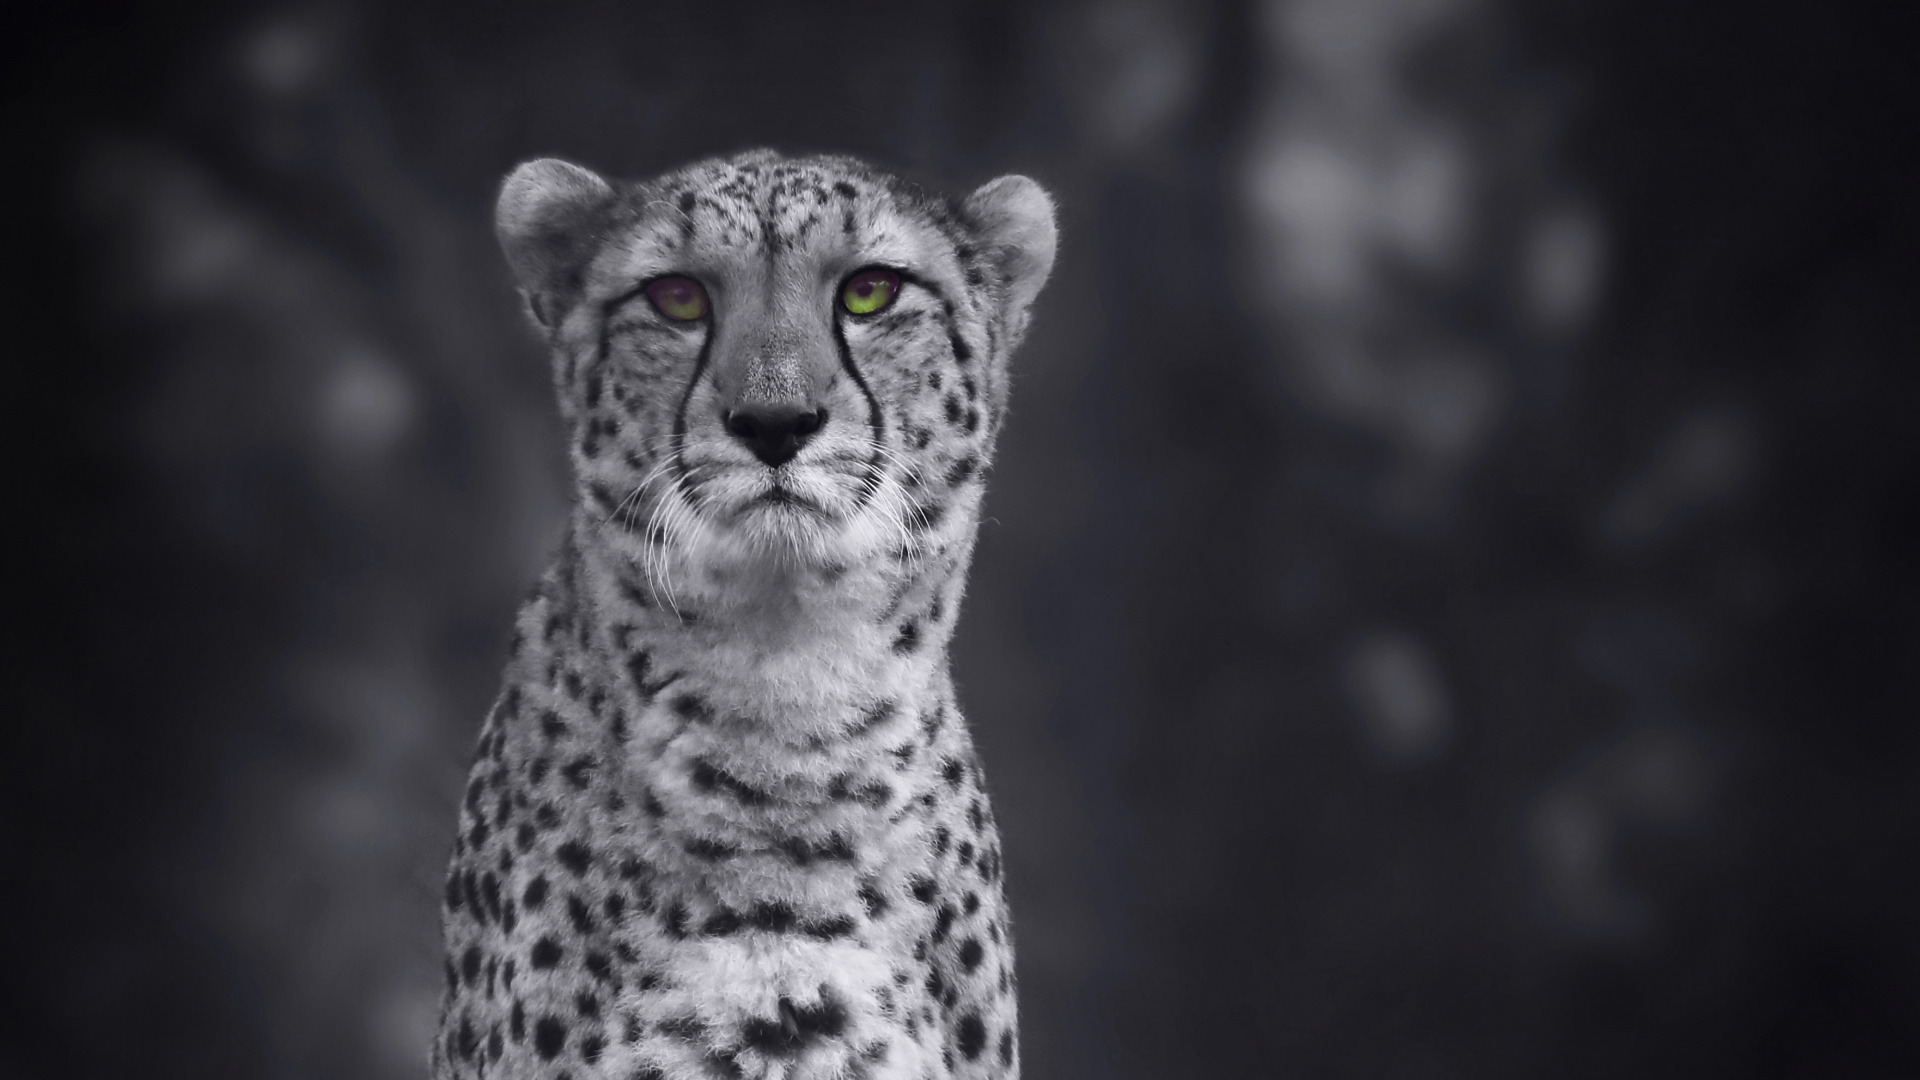 Grayscale Photo of Cheetah on Grass. Wallpaper in 1920x1080 Resolution